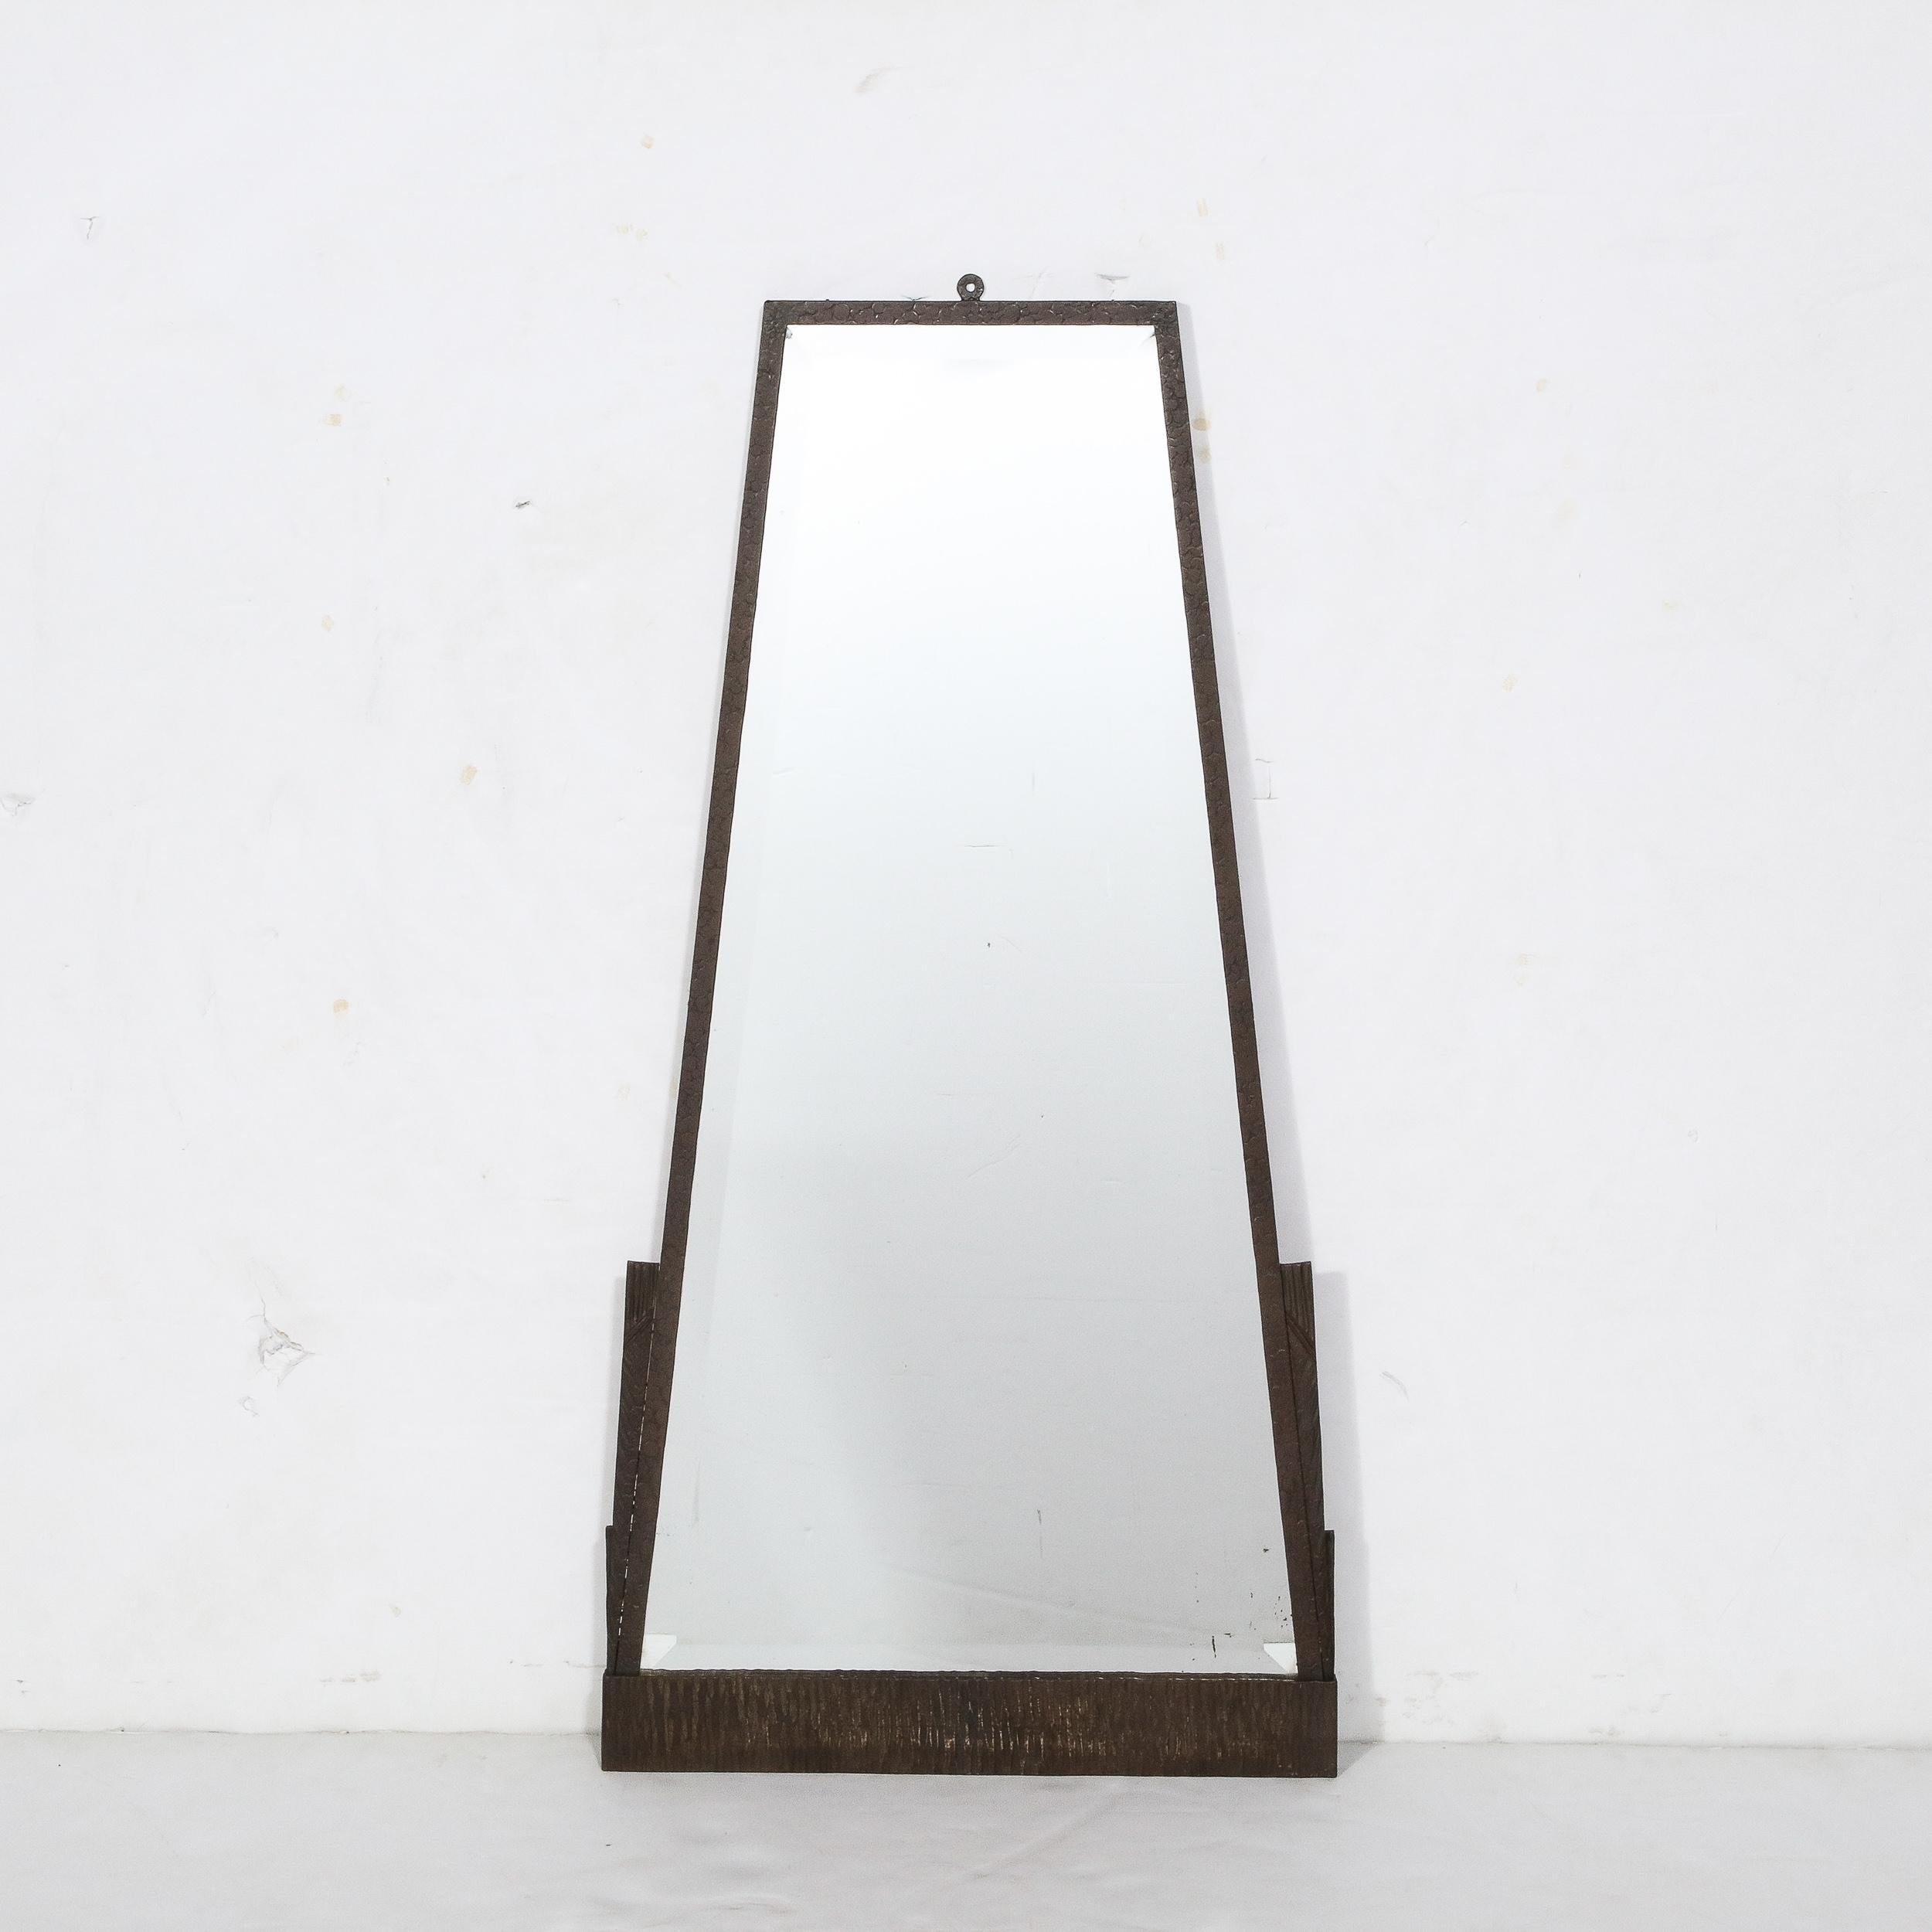 This bold Art Deco Skyscraper Style Pyramidal Mirror in Oil Rubbed Bronze originates from the France , Circa 1935. Featuring a carefully scaled geometric frame in Solid Bronze, the framework is widest at the base with stepped skyscraper detailing